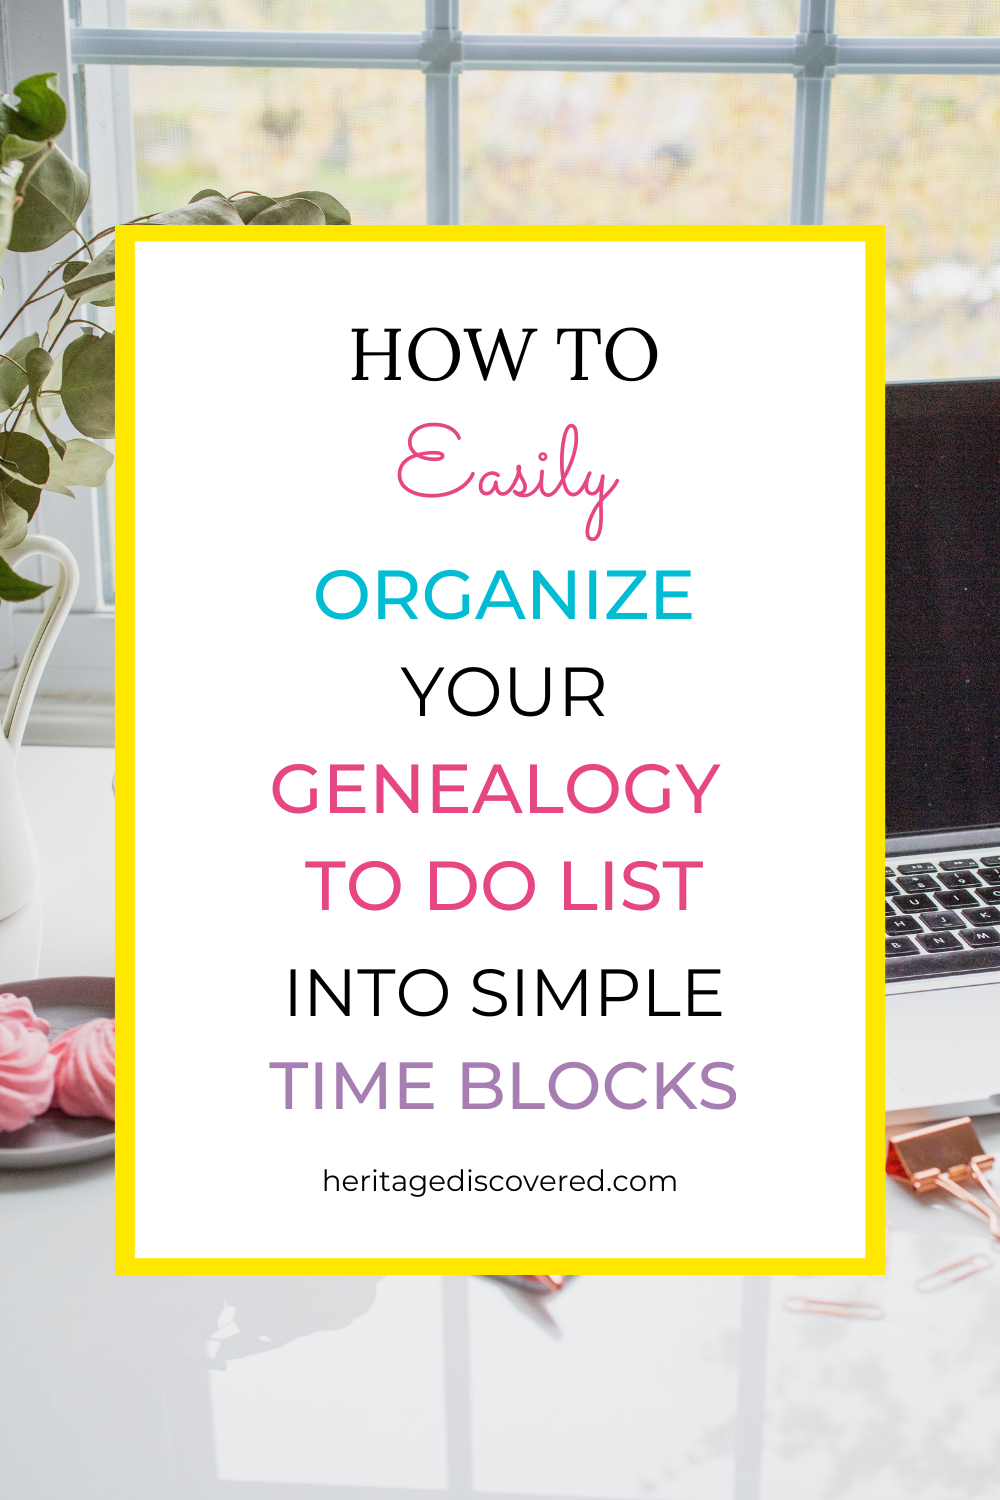 how-to-easily-organize-your-genealogy-to-do-list-into-simple-time-blocks